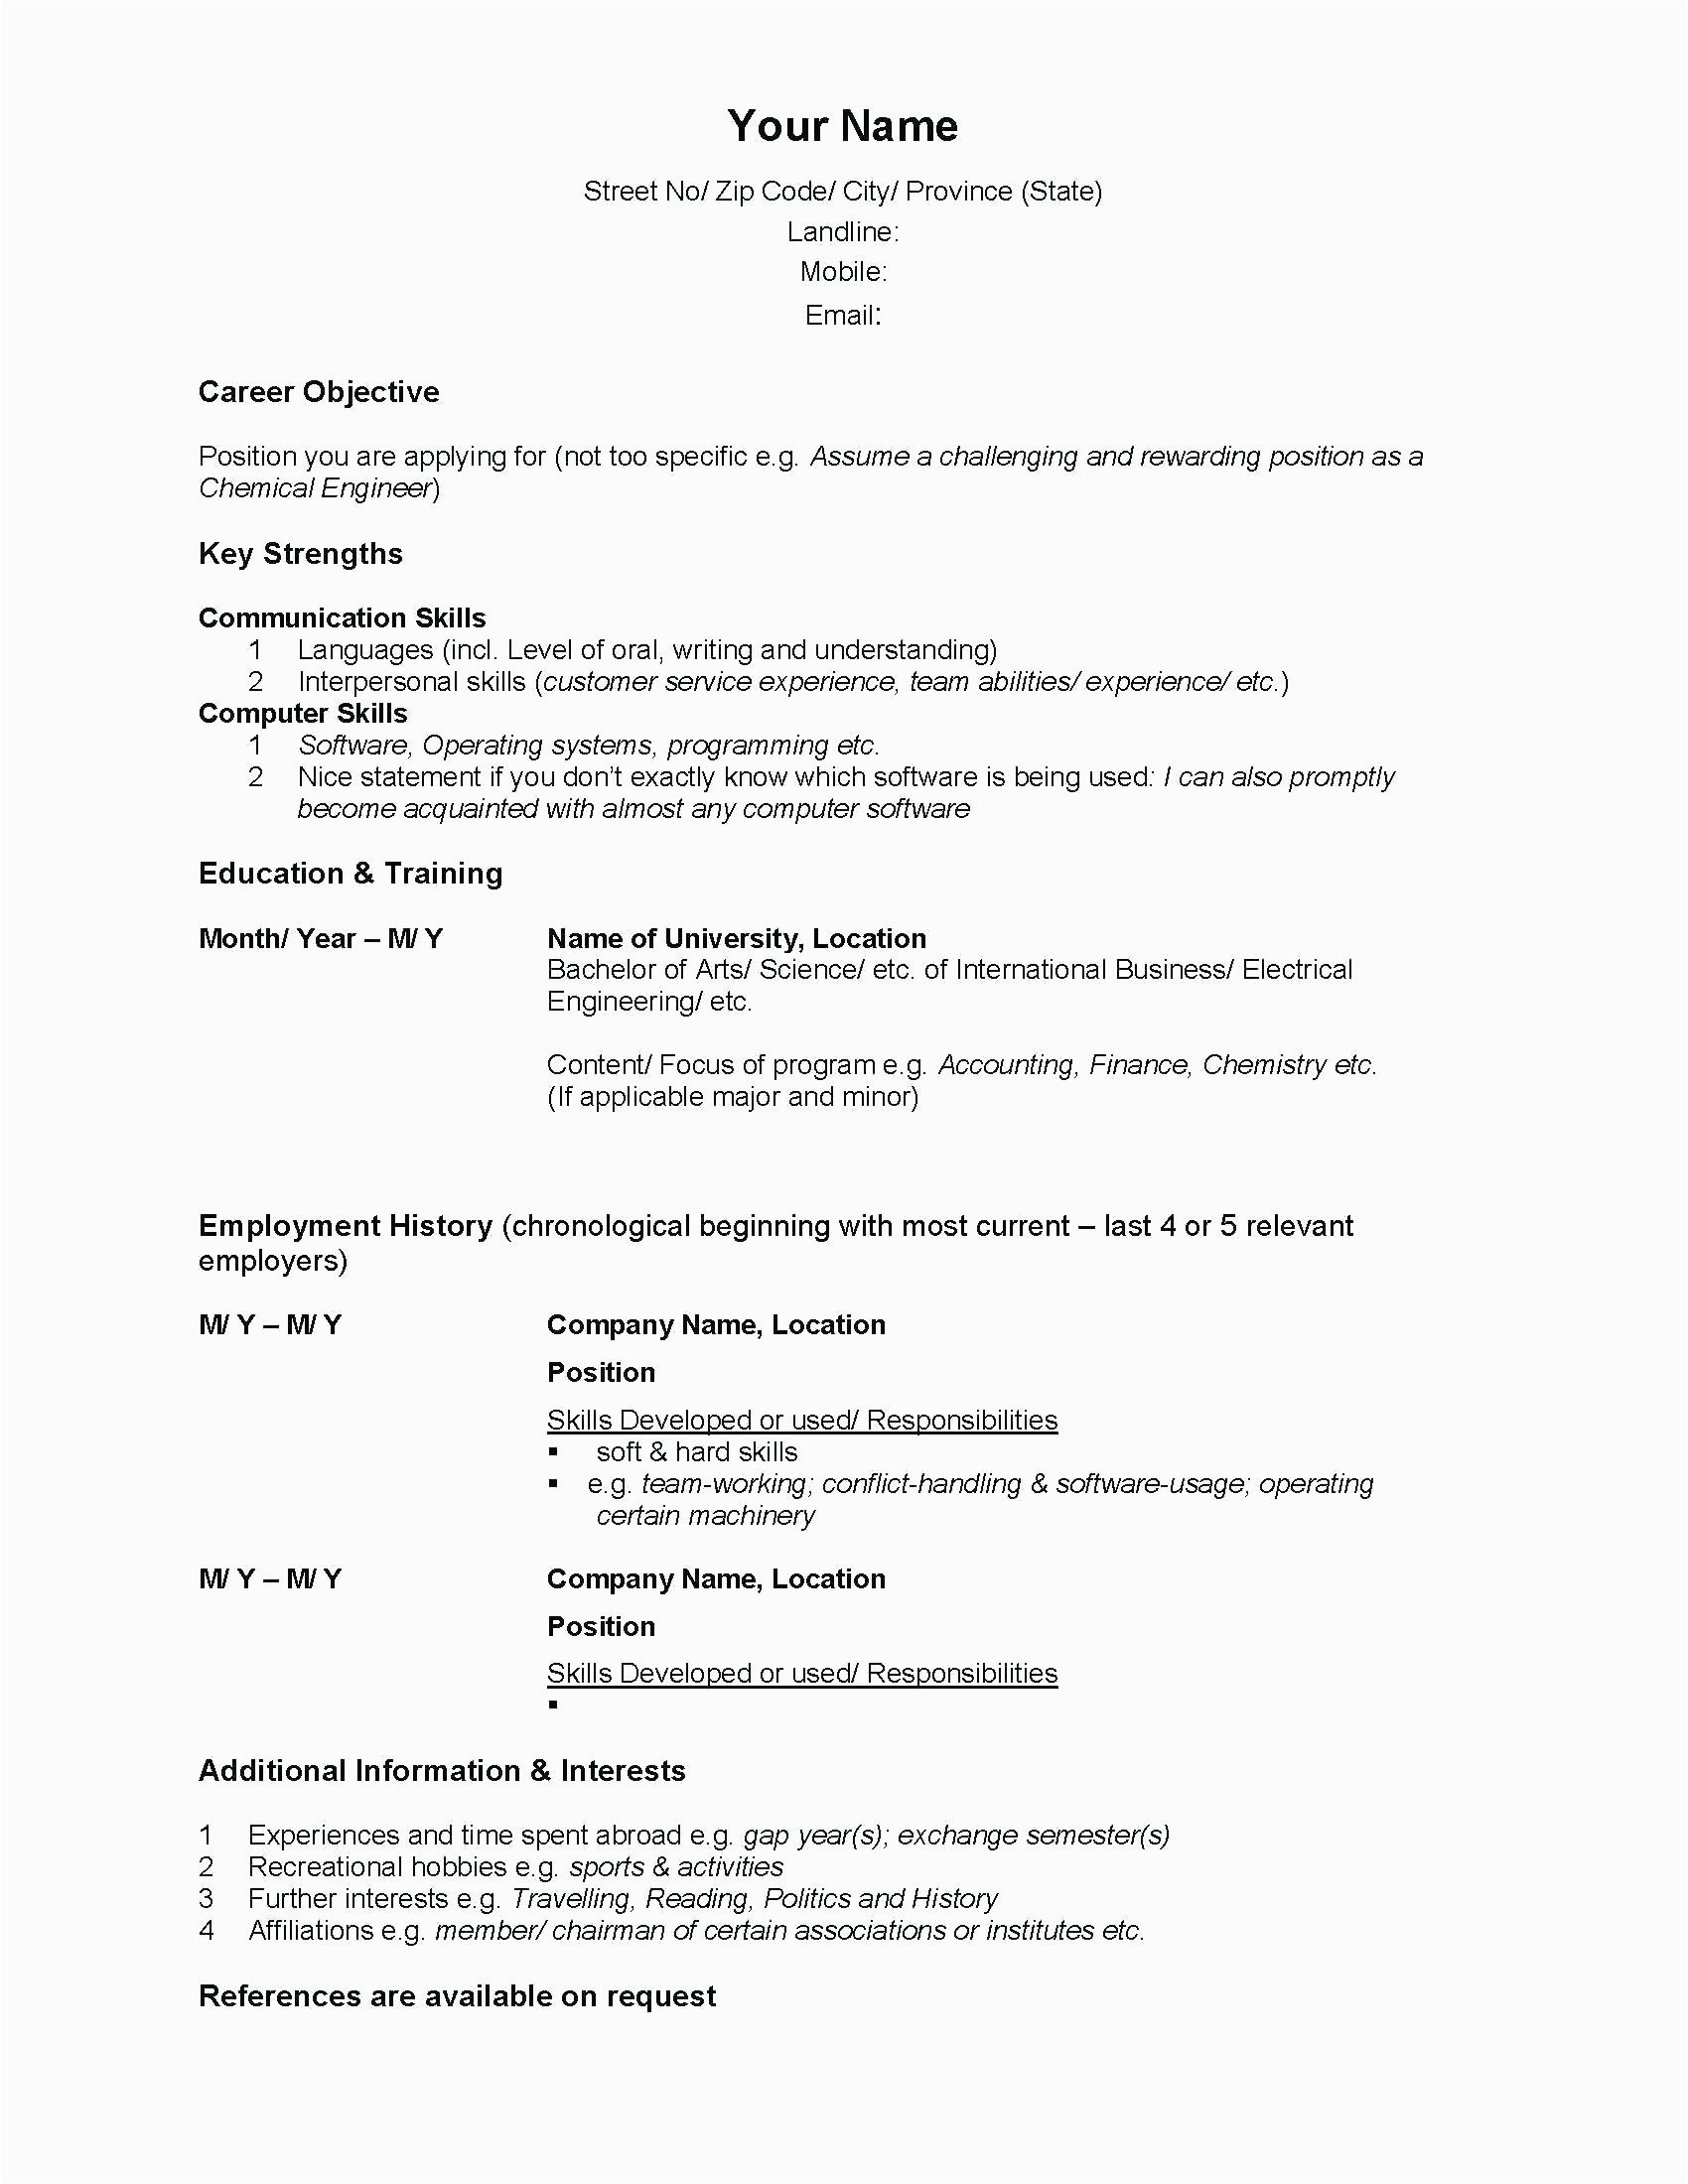 Sample Of Skills and Interest In Resume 12 Resume Skills and Interests Examples Radaircars